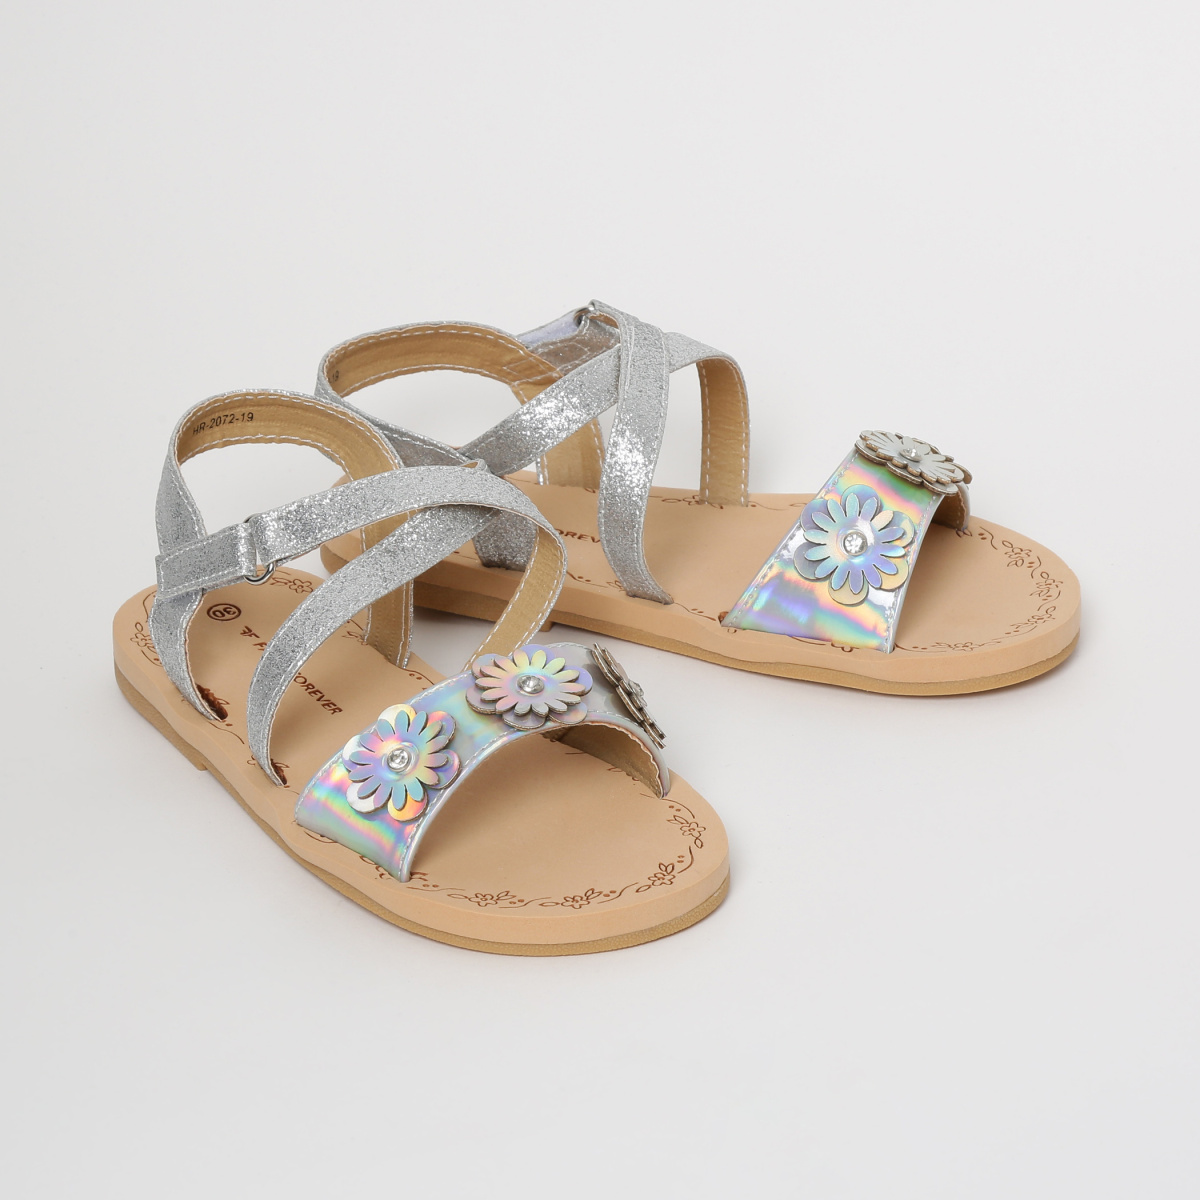 FAME FOREVER Shimmery Flat Sandals with Floral Applique